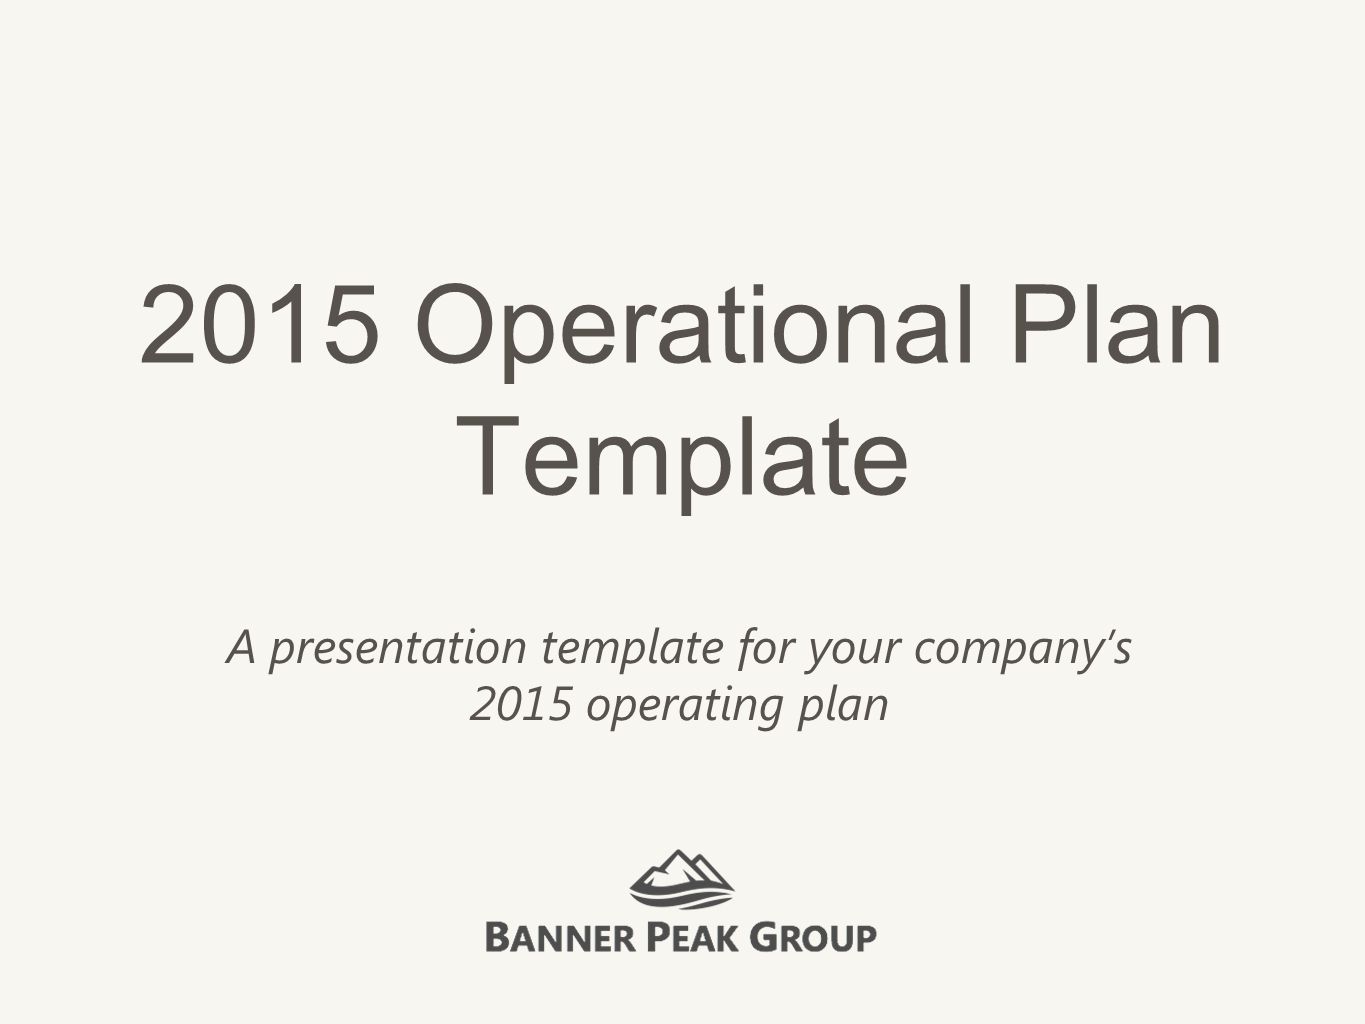 Quick Business Plan or Operational Plan Template